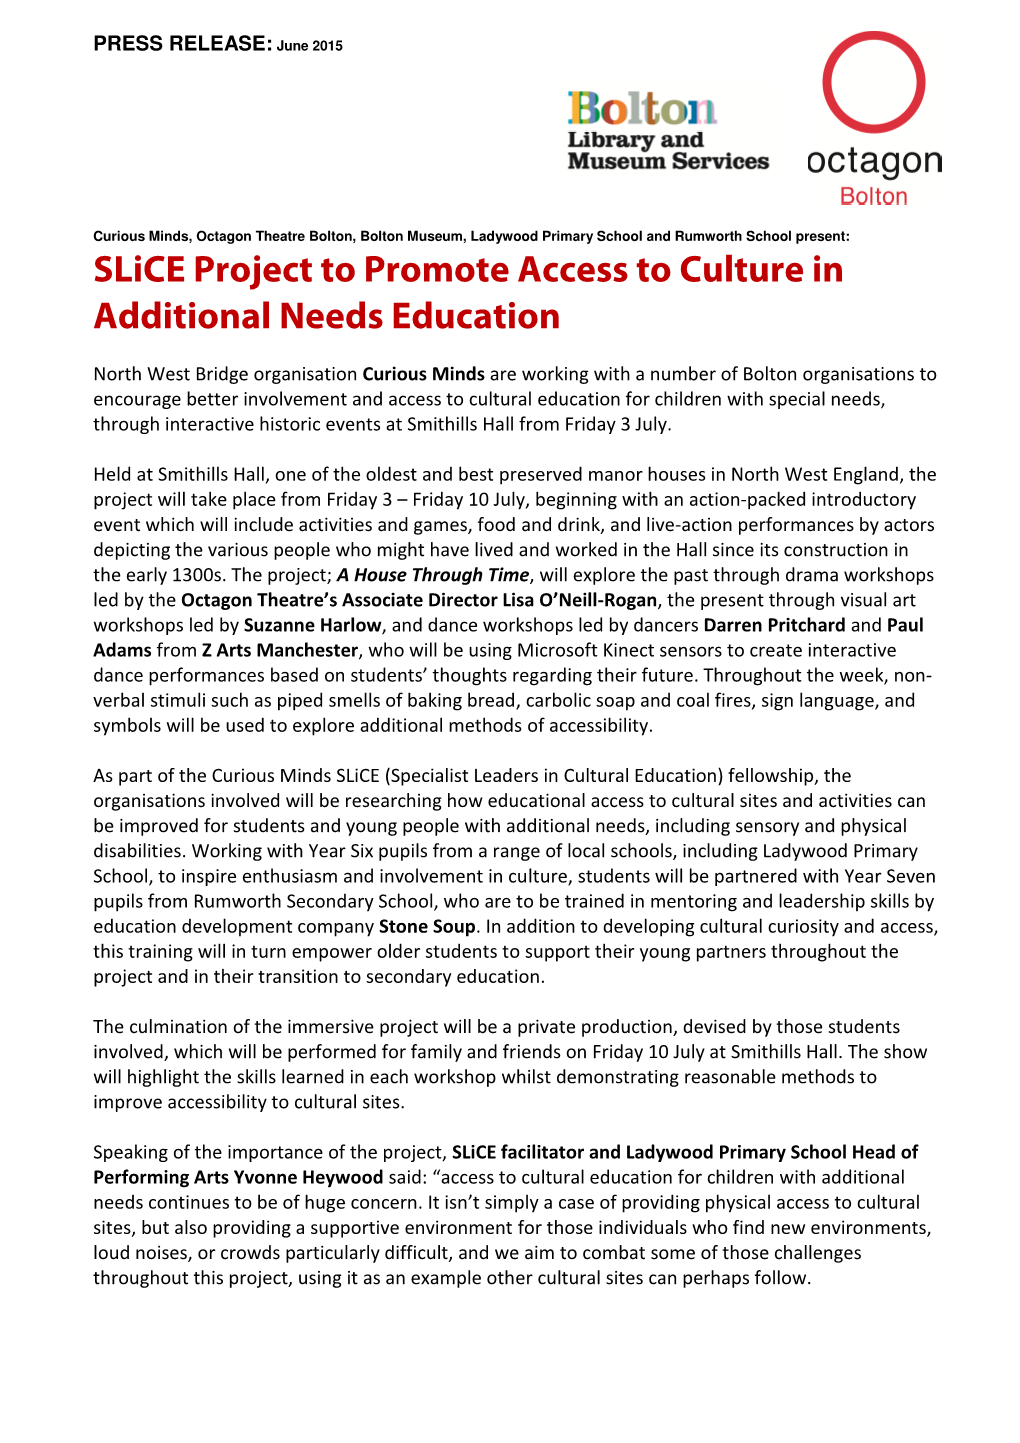 Slice Project to Promote Access to Culture in Additional Needs Education